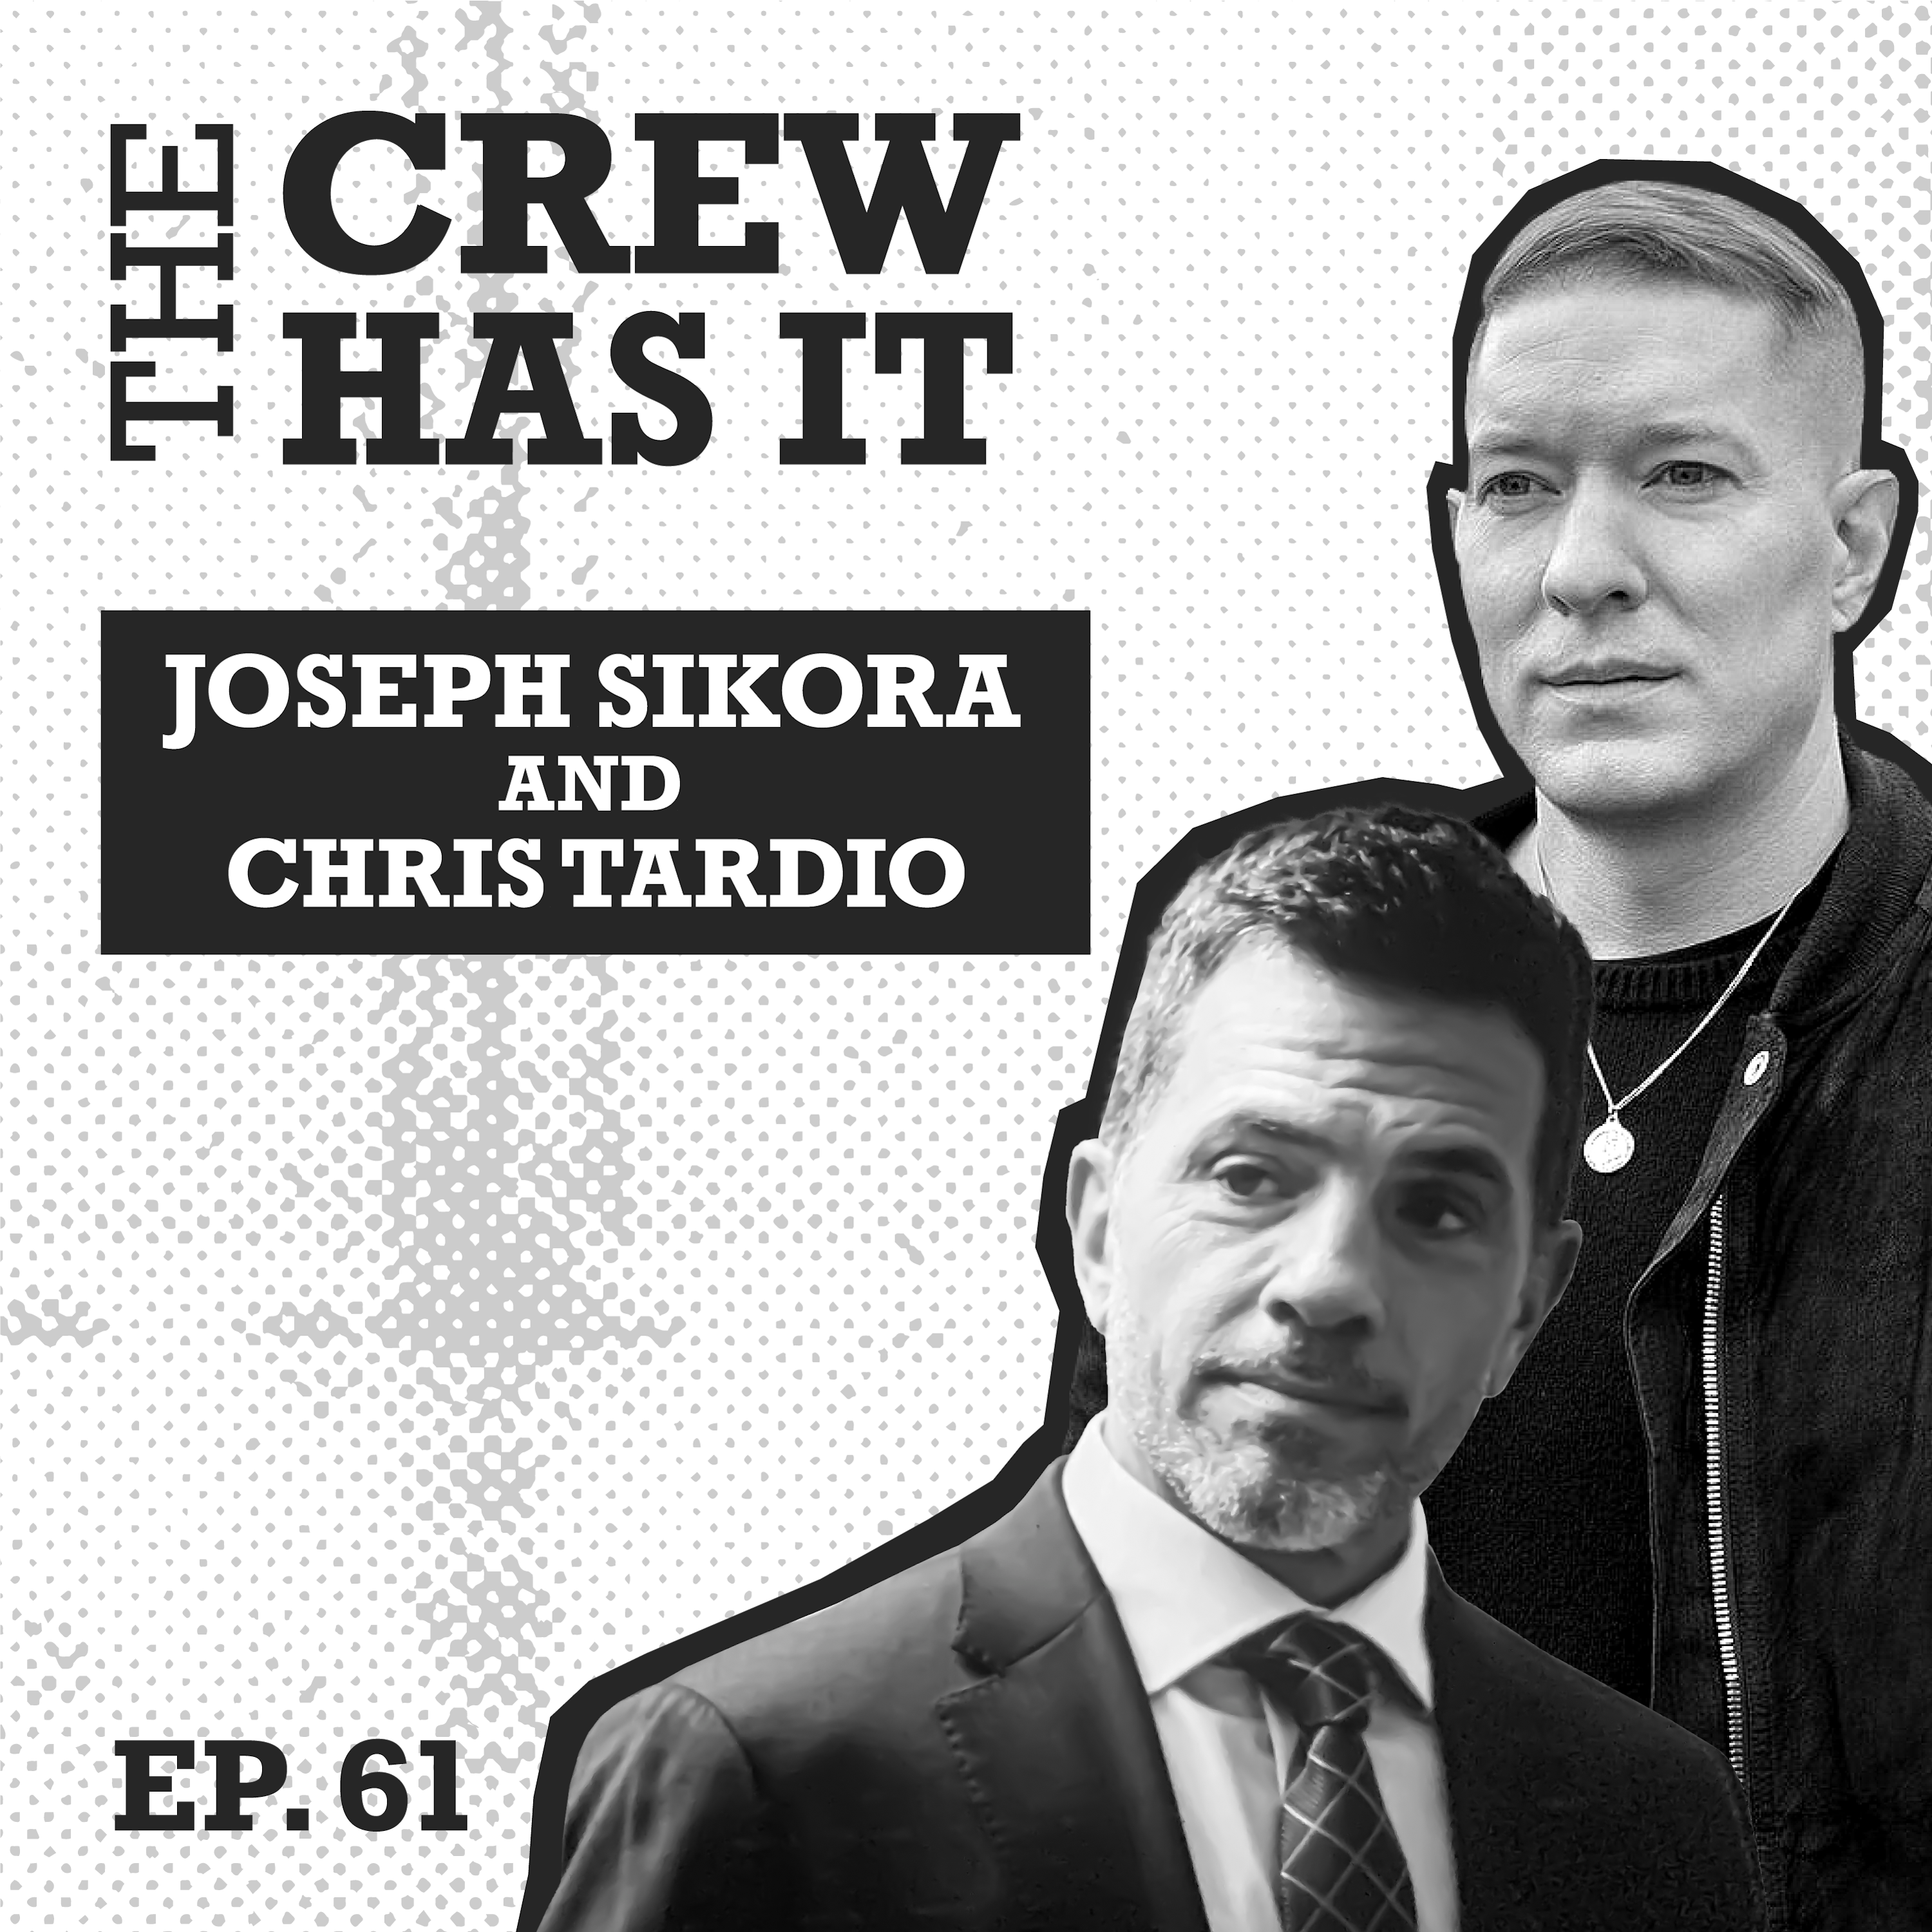 We’re Back! Joseph Sikora Sits Down w/ Gianni Paolo | Ep 61 | The Crew Has It